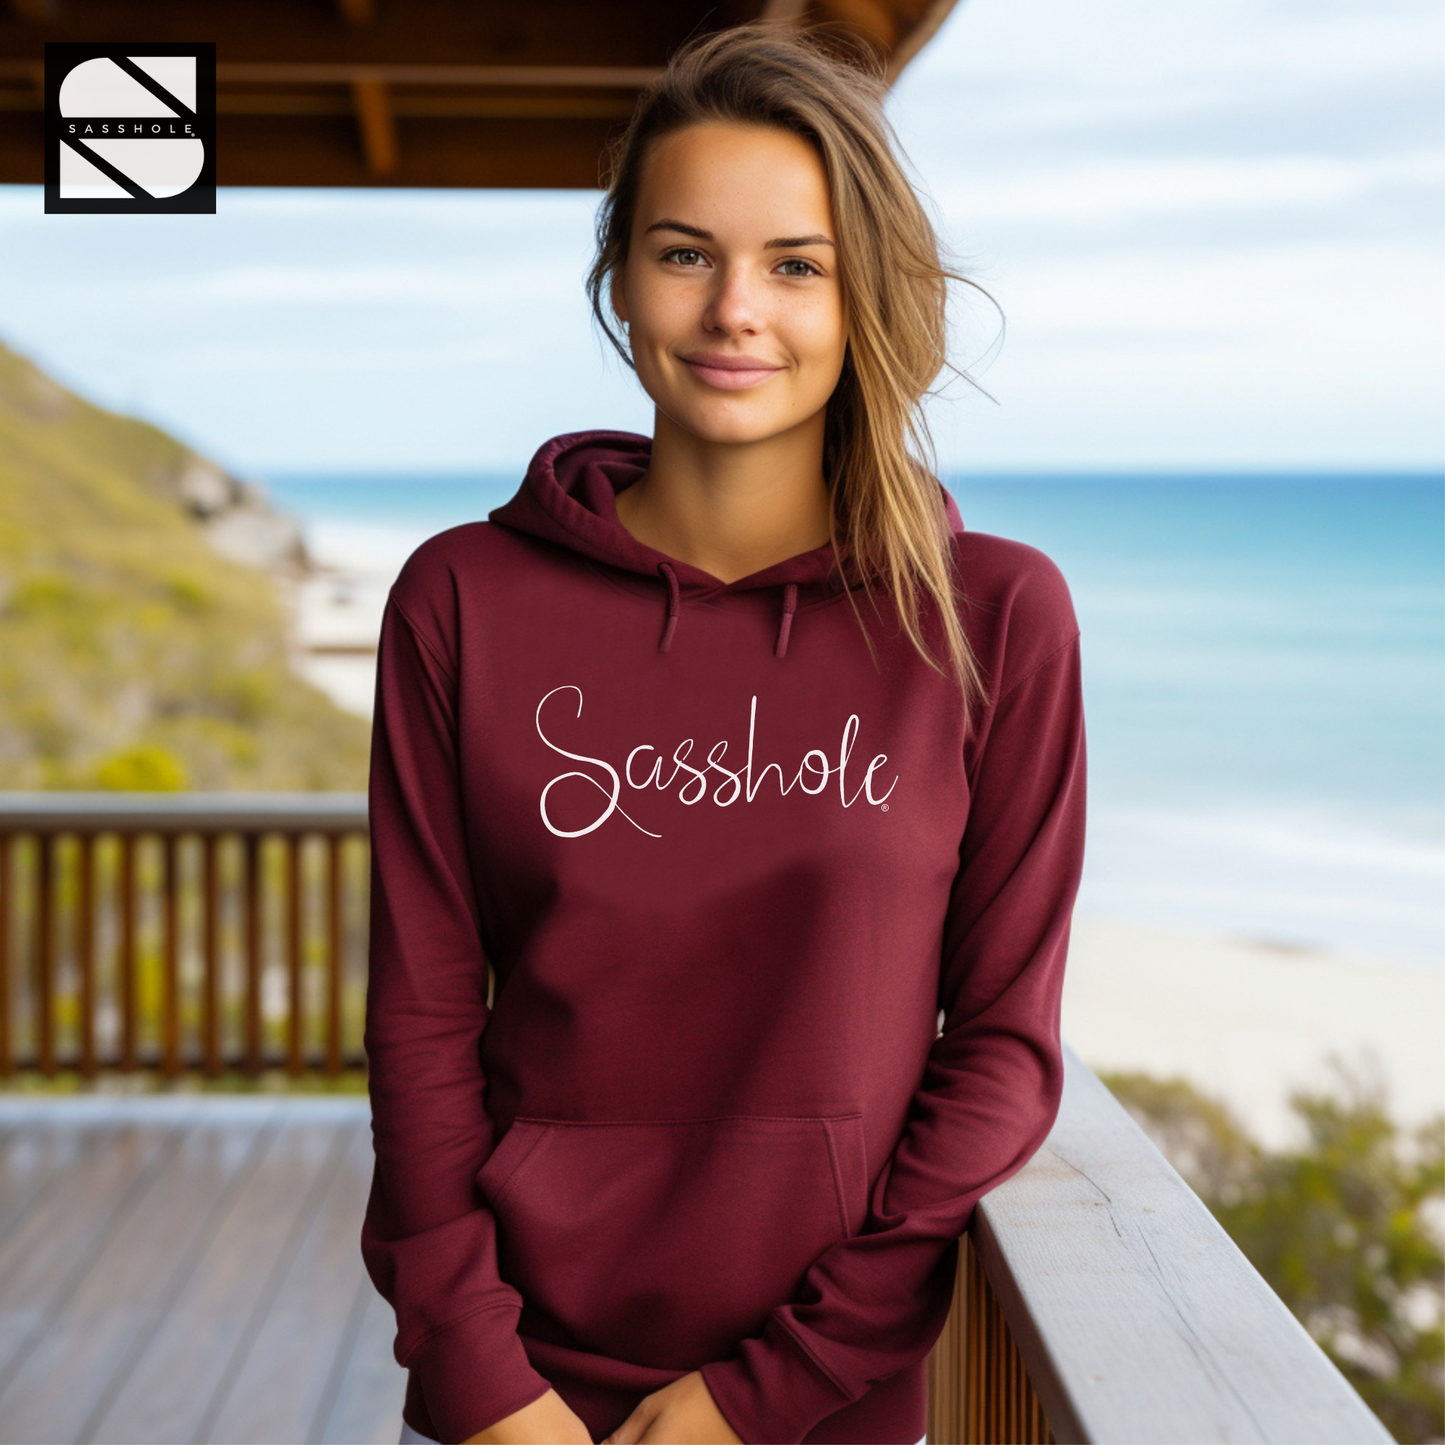 womens pullover hoodie, womens oversized pullover hoodie, womens hoodies, womens hoodie, womens graphic pullover hoodies, womens fleece pullover hoodies, womens black hoodie pullover, womens black hoodie, women's pullover hoodies, women's pullover, women's hoods, women's hooded sweatshirts, women's hooded sweatshirt, Women's Clothing, women's casual wear, women's black graphic hoodie, women hoodies, women hoodie, witty wardrobe, witty slogan hood